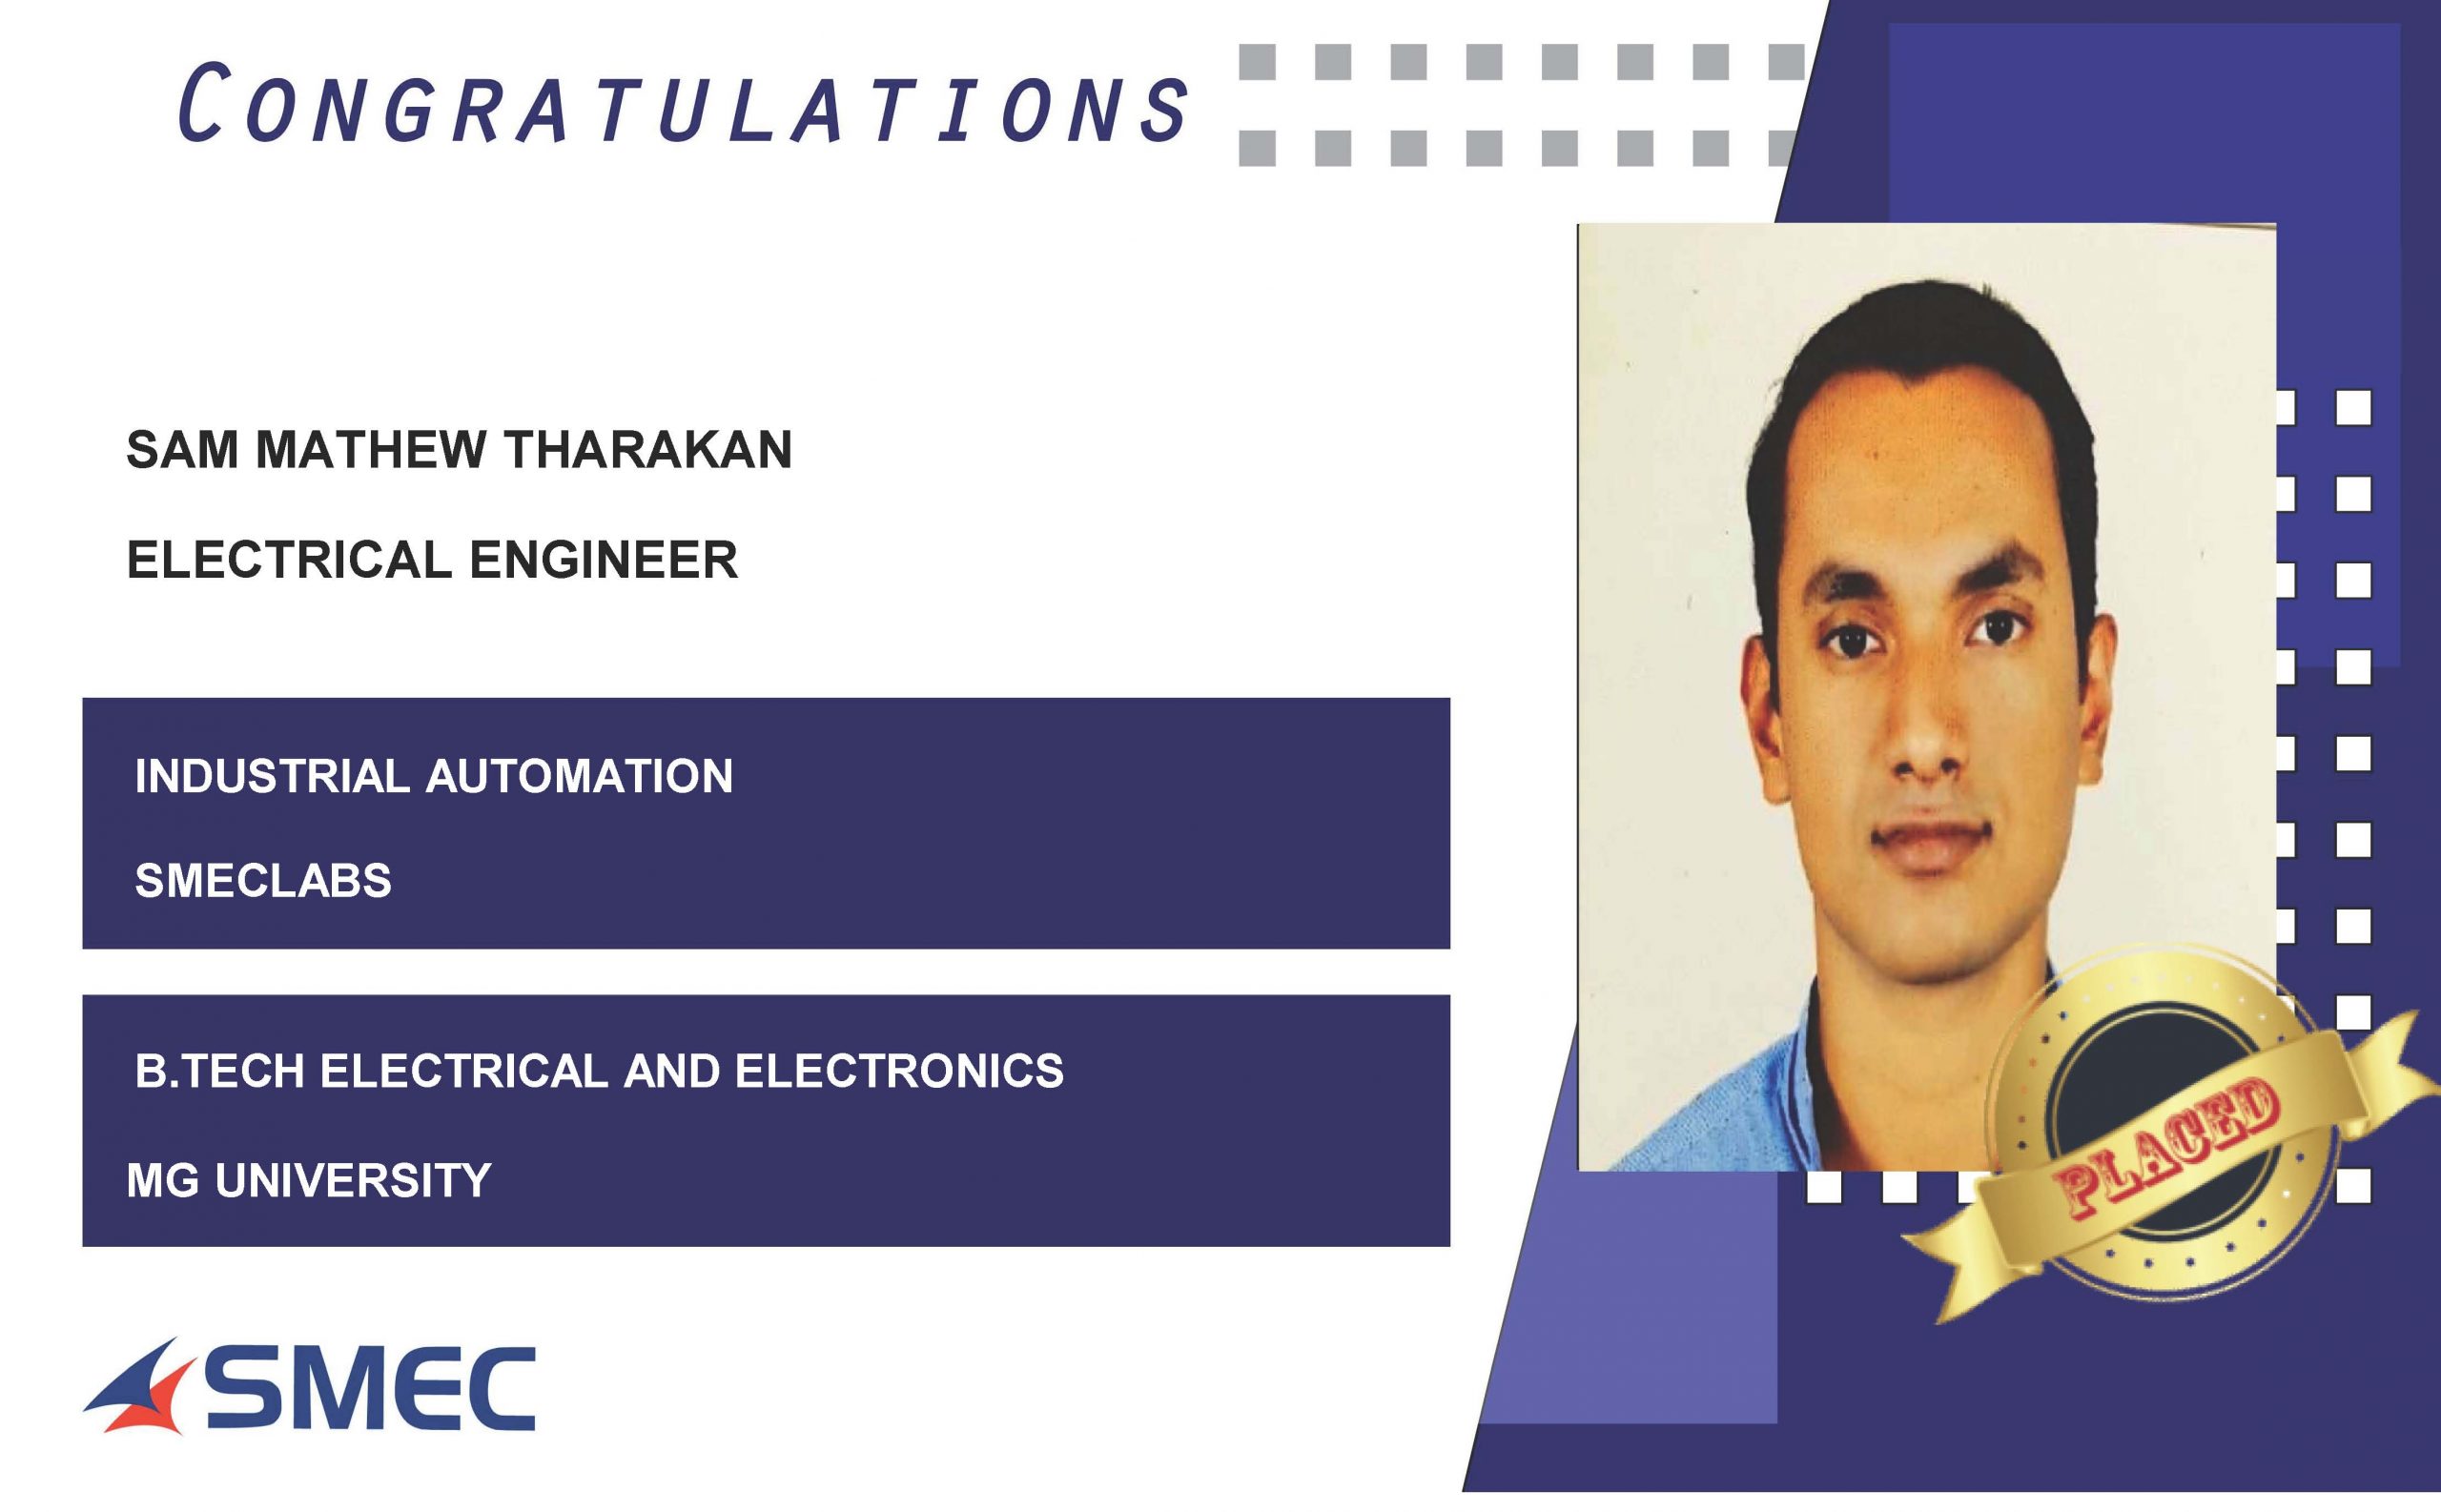 Sam Mathew Tharakan Placed Successfully as Electrical Engineer